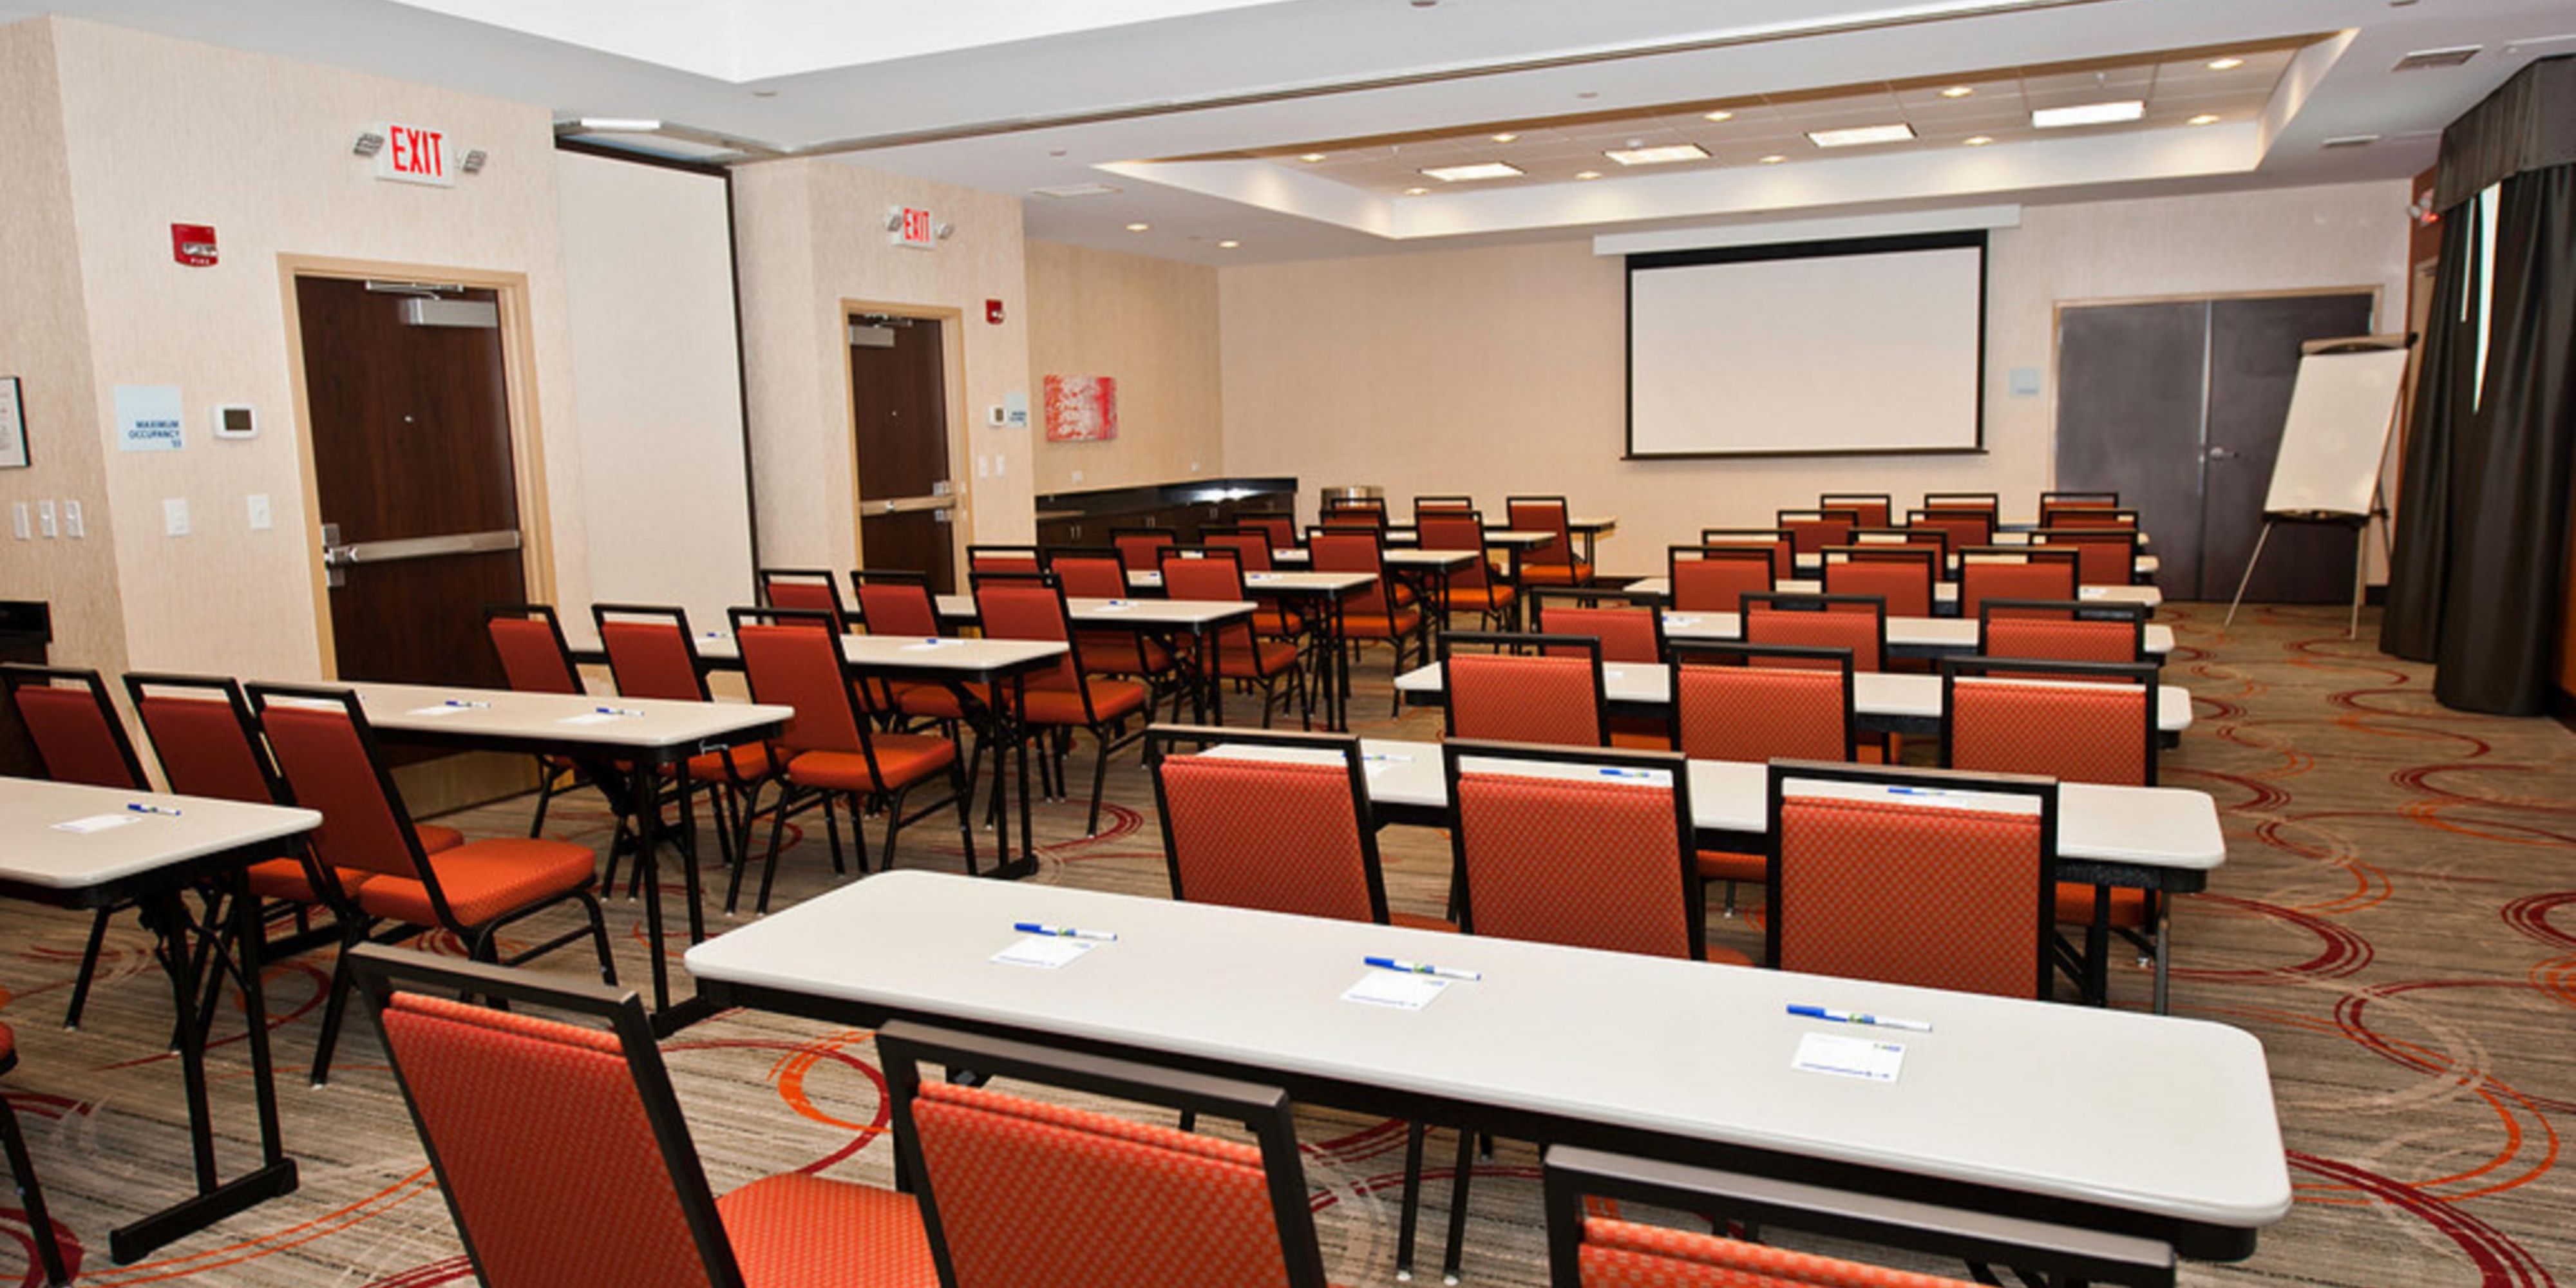 Looking for a place to host your next meeting, shower, or team time? With our 1260 Square Feet of meeting space, we can accommodate a Boardroom for up to 24 people, a small event for 64 or anywhere in-between! Coffee and Water is provided, and Outside Catering is permitted! Need overnight accommodations too? Call the hotel for a special group rate!